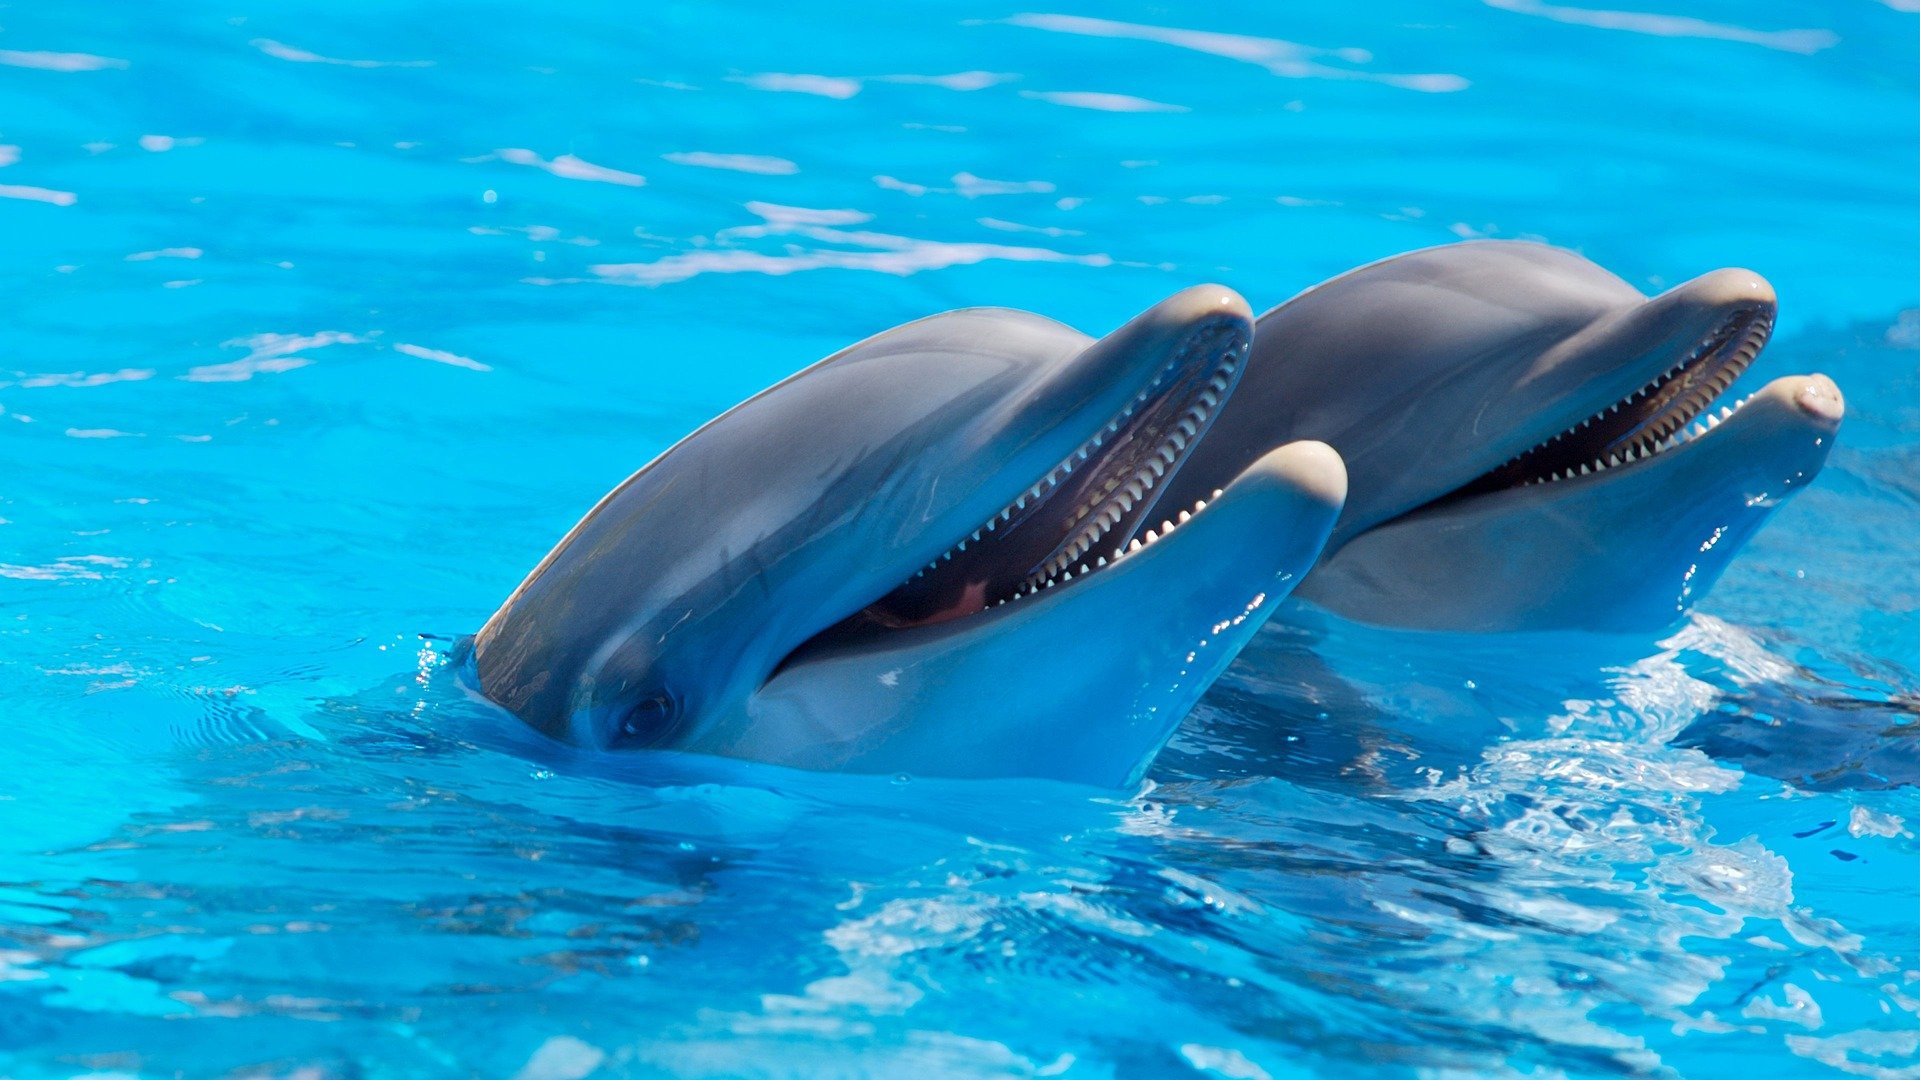 Enjoy a dolphin tour on your next vacation to the Florida Keys